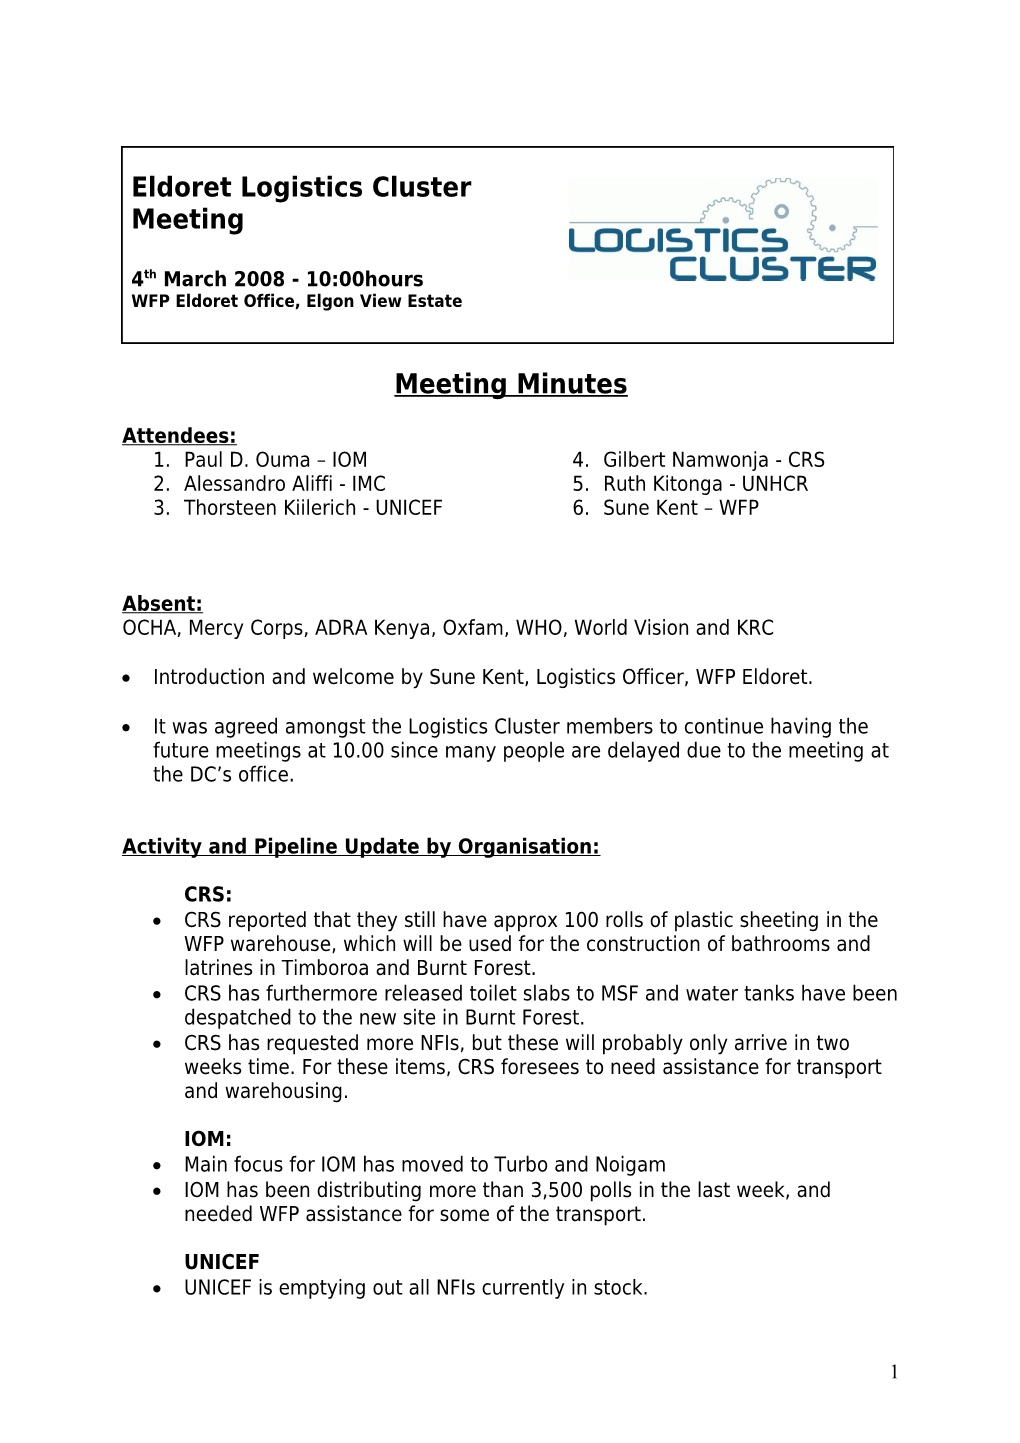 Meeting Minutes s12